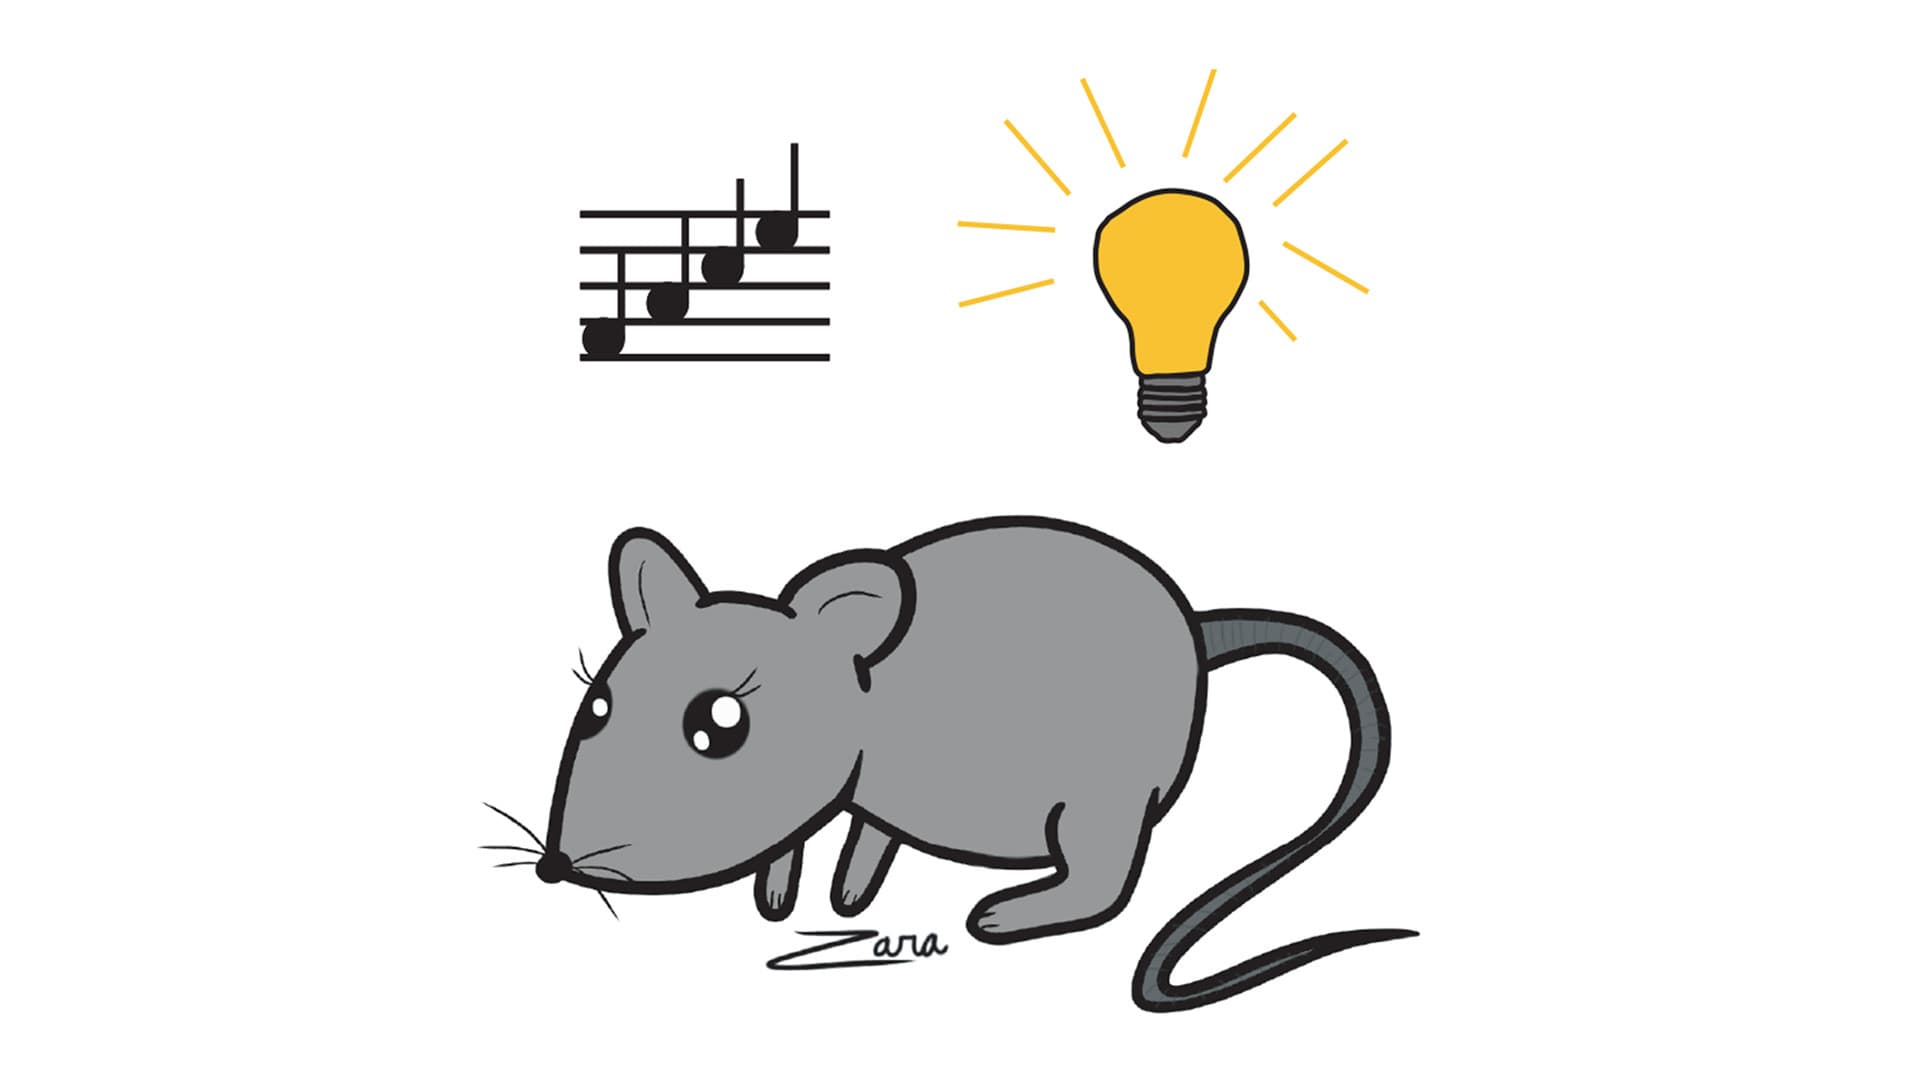 Illustration of mouse in the light with musical notes